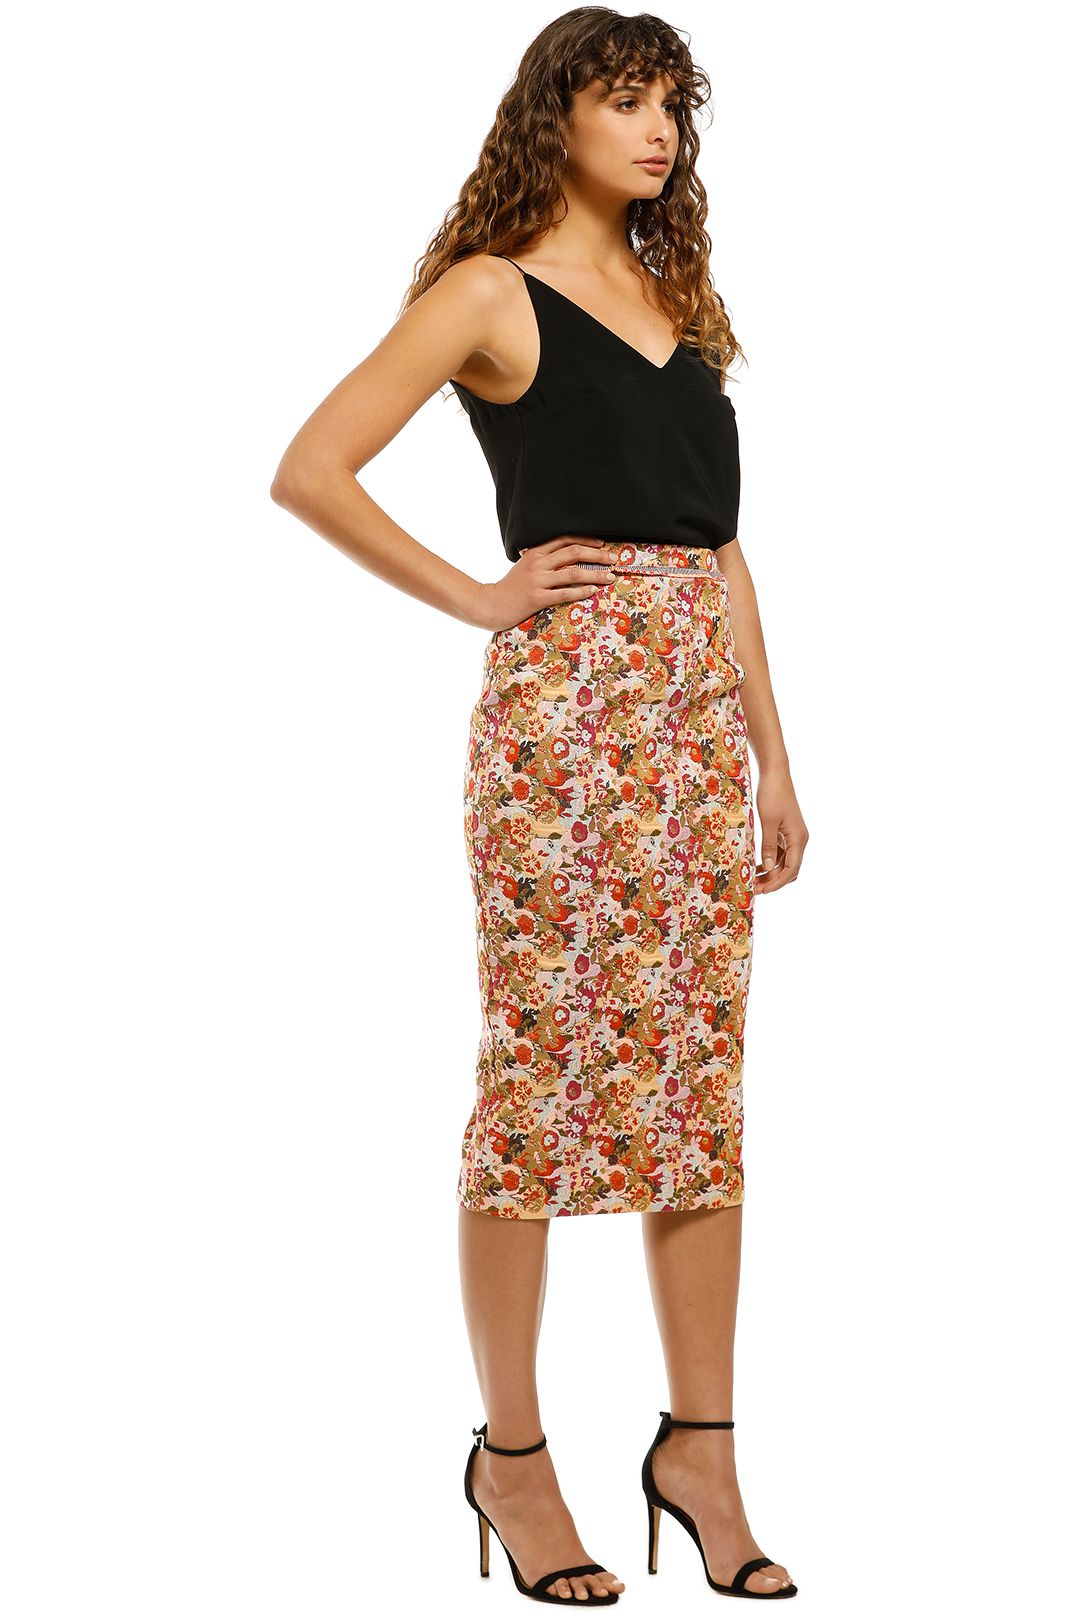 Moss-and-Spy-Monet-Pencil-Skirt-Floral-Side